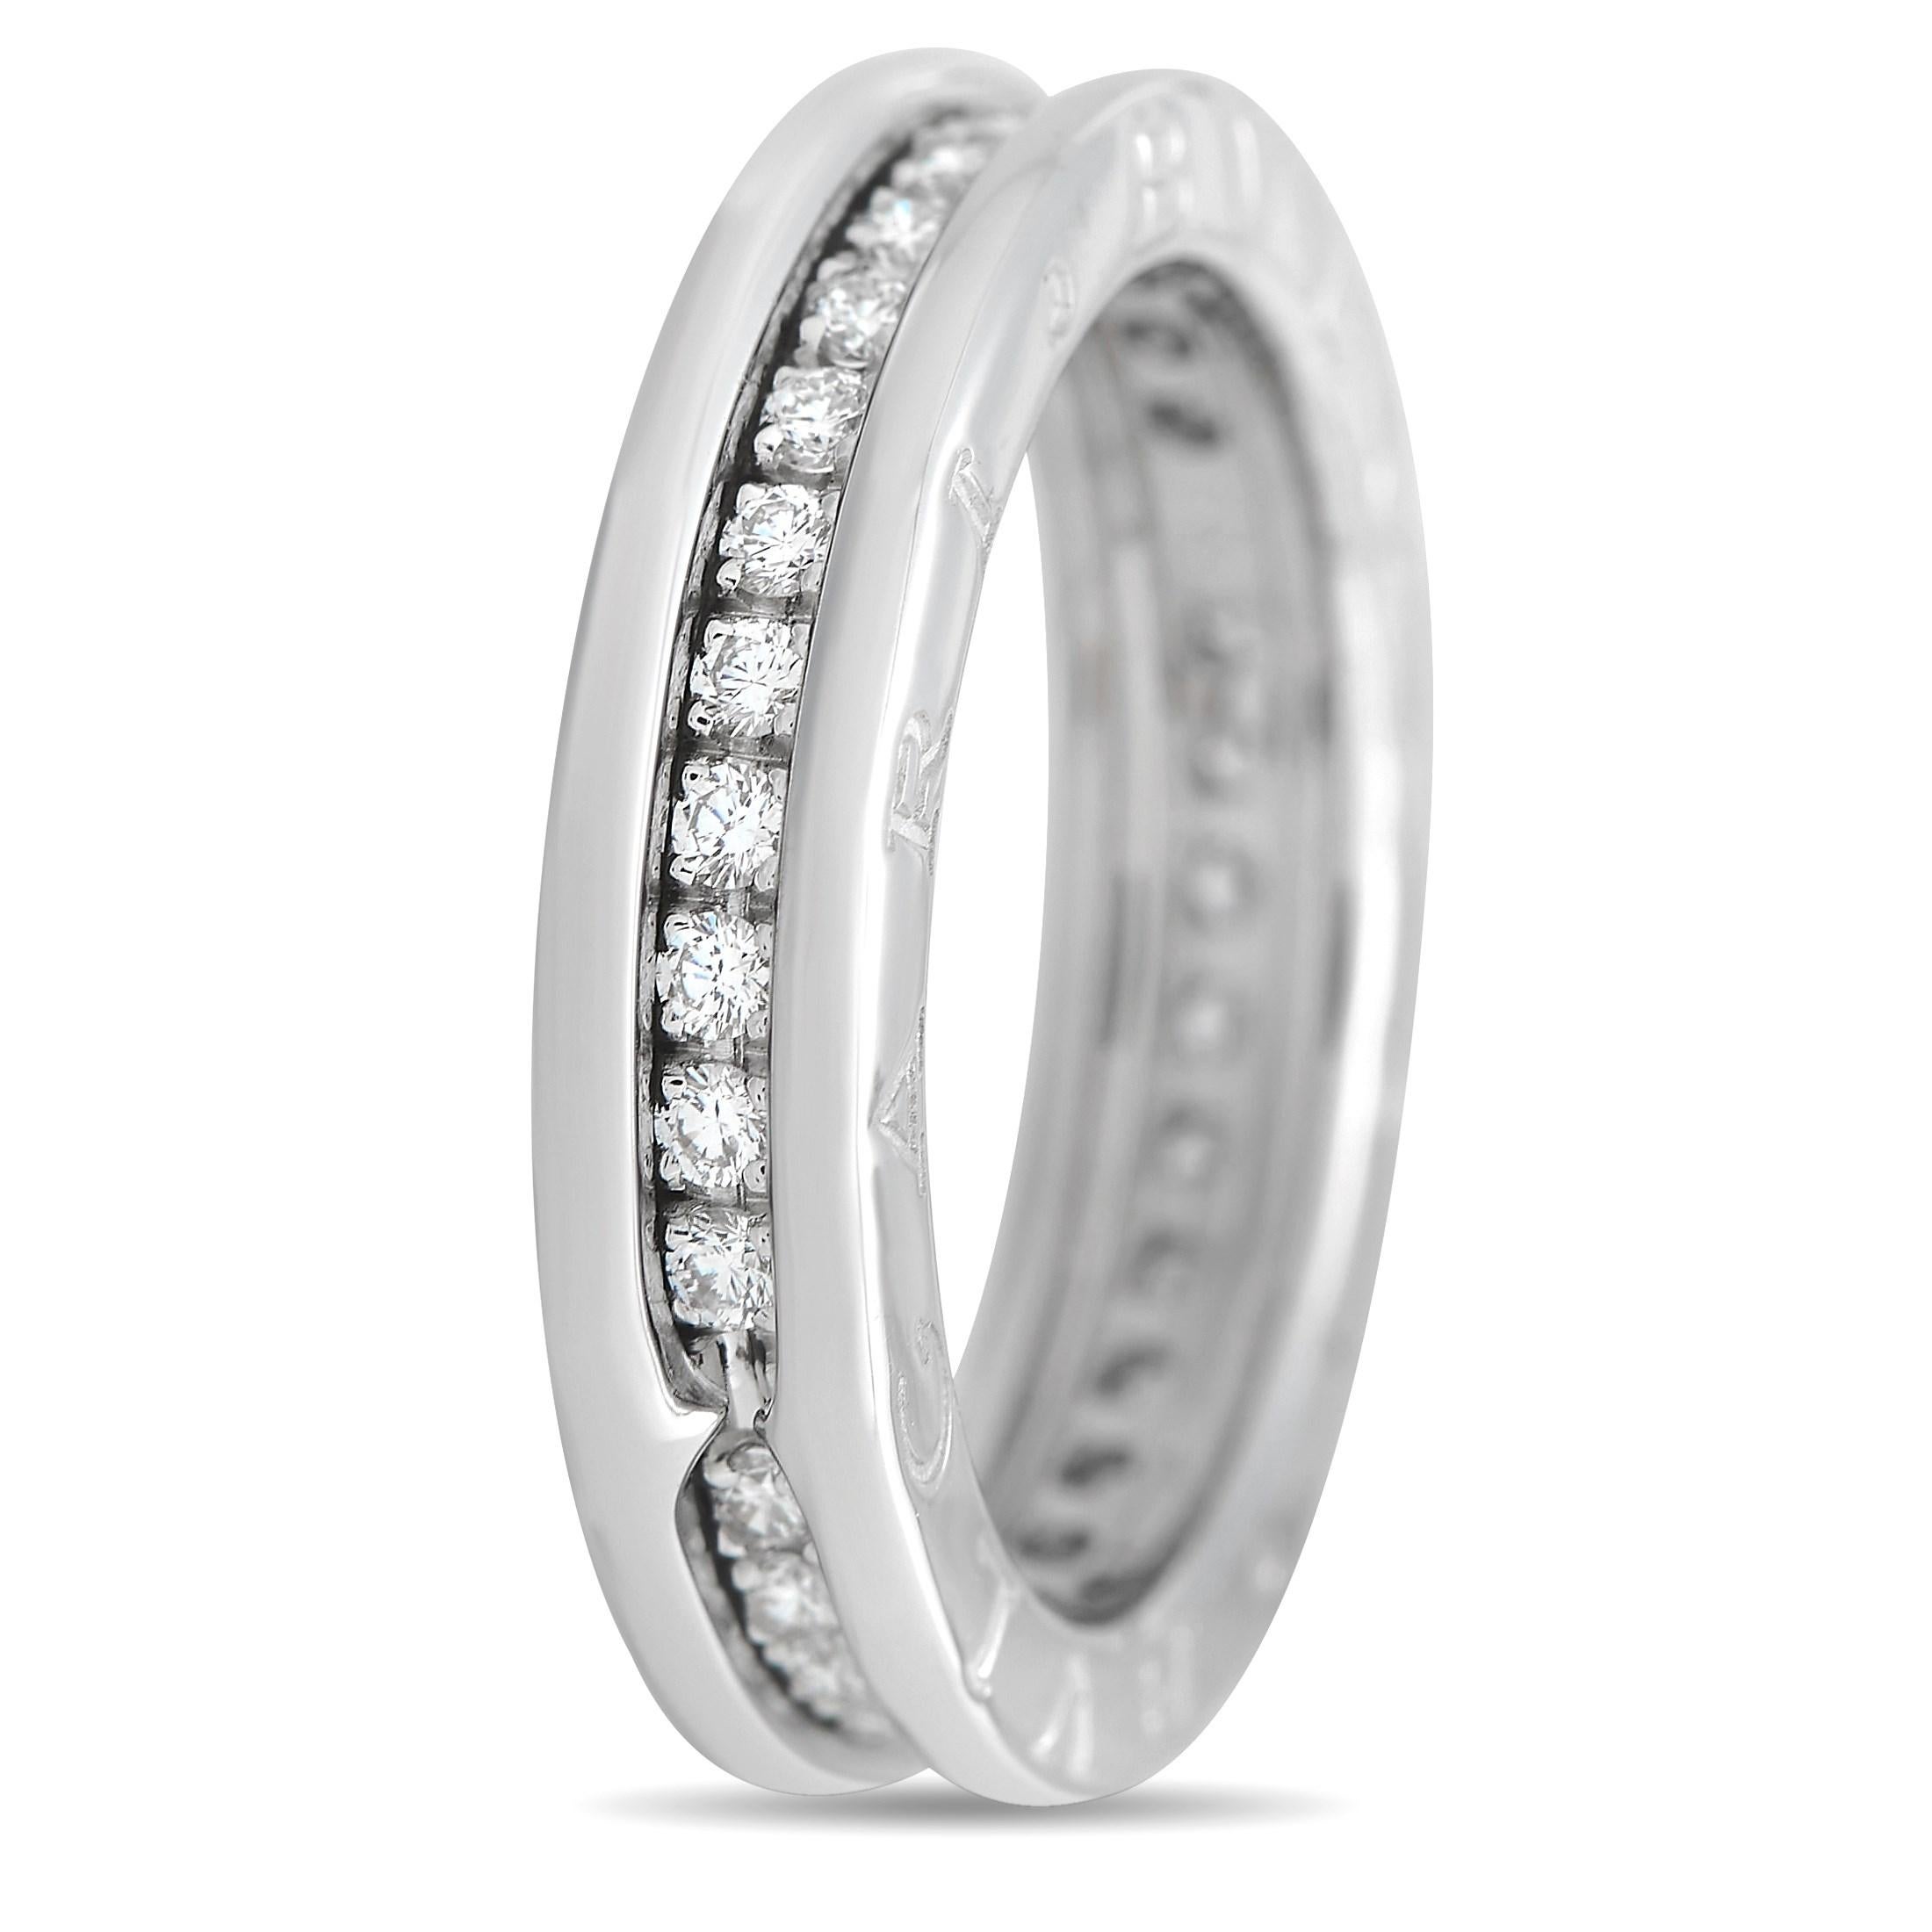 The B.Zero1 One-Band Ring from Bvlgari is indeed a new classic. Clad in white gold and adorned with 0.30 ct diamonds, the ring glitters with modern elegance. This piece of jewelry that was inspired by Rome’s magnificent Colosseum showcases an